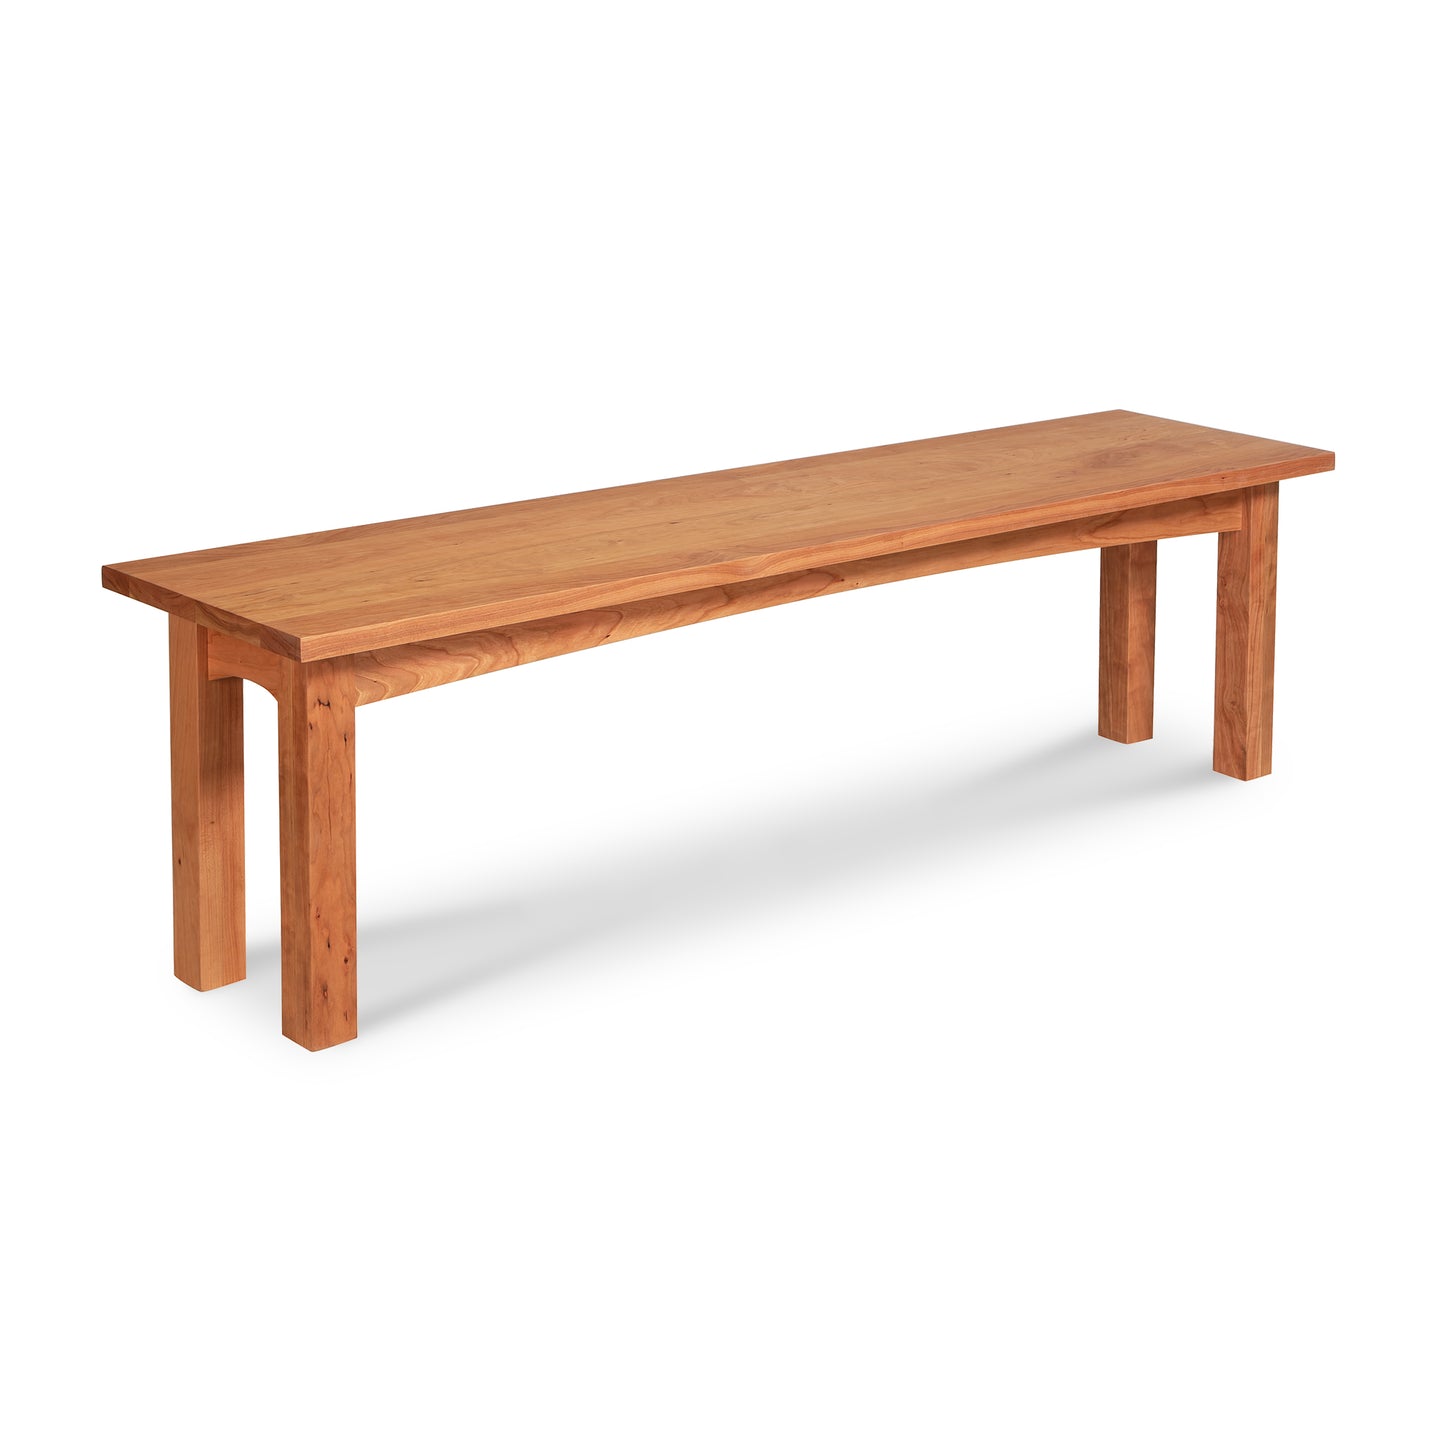 A simple Burlington Shaker Bench from Vermont Furniture Designs on a white background.